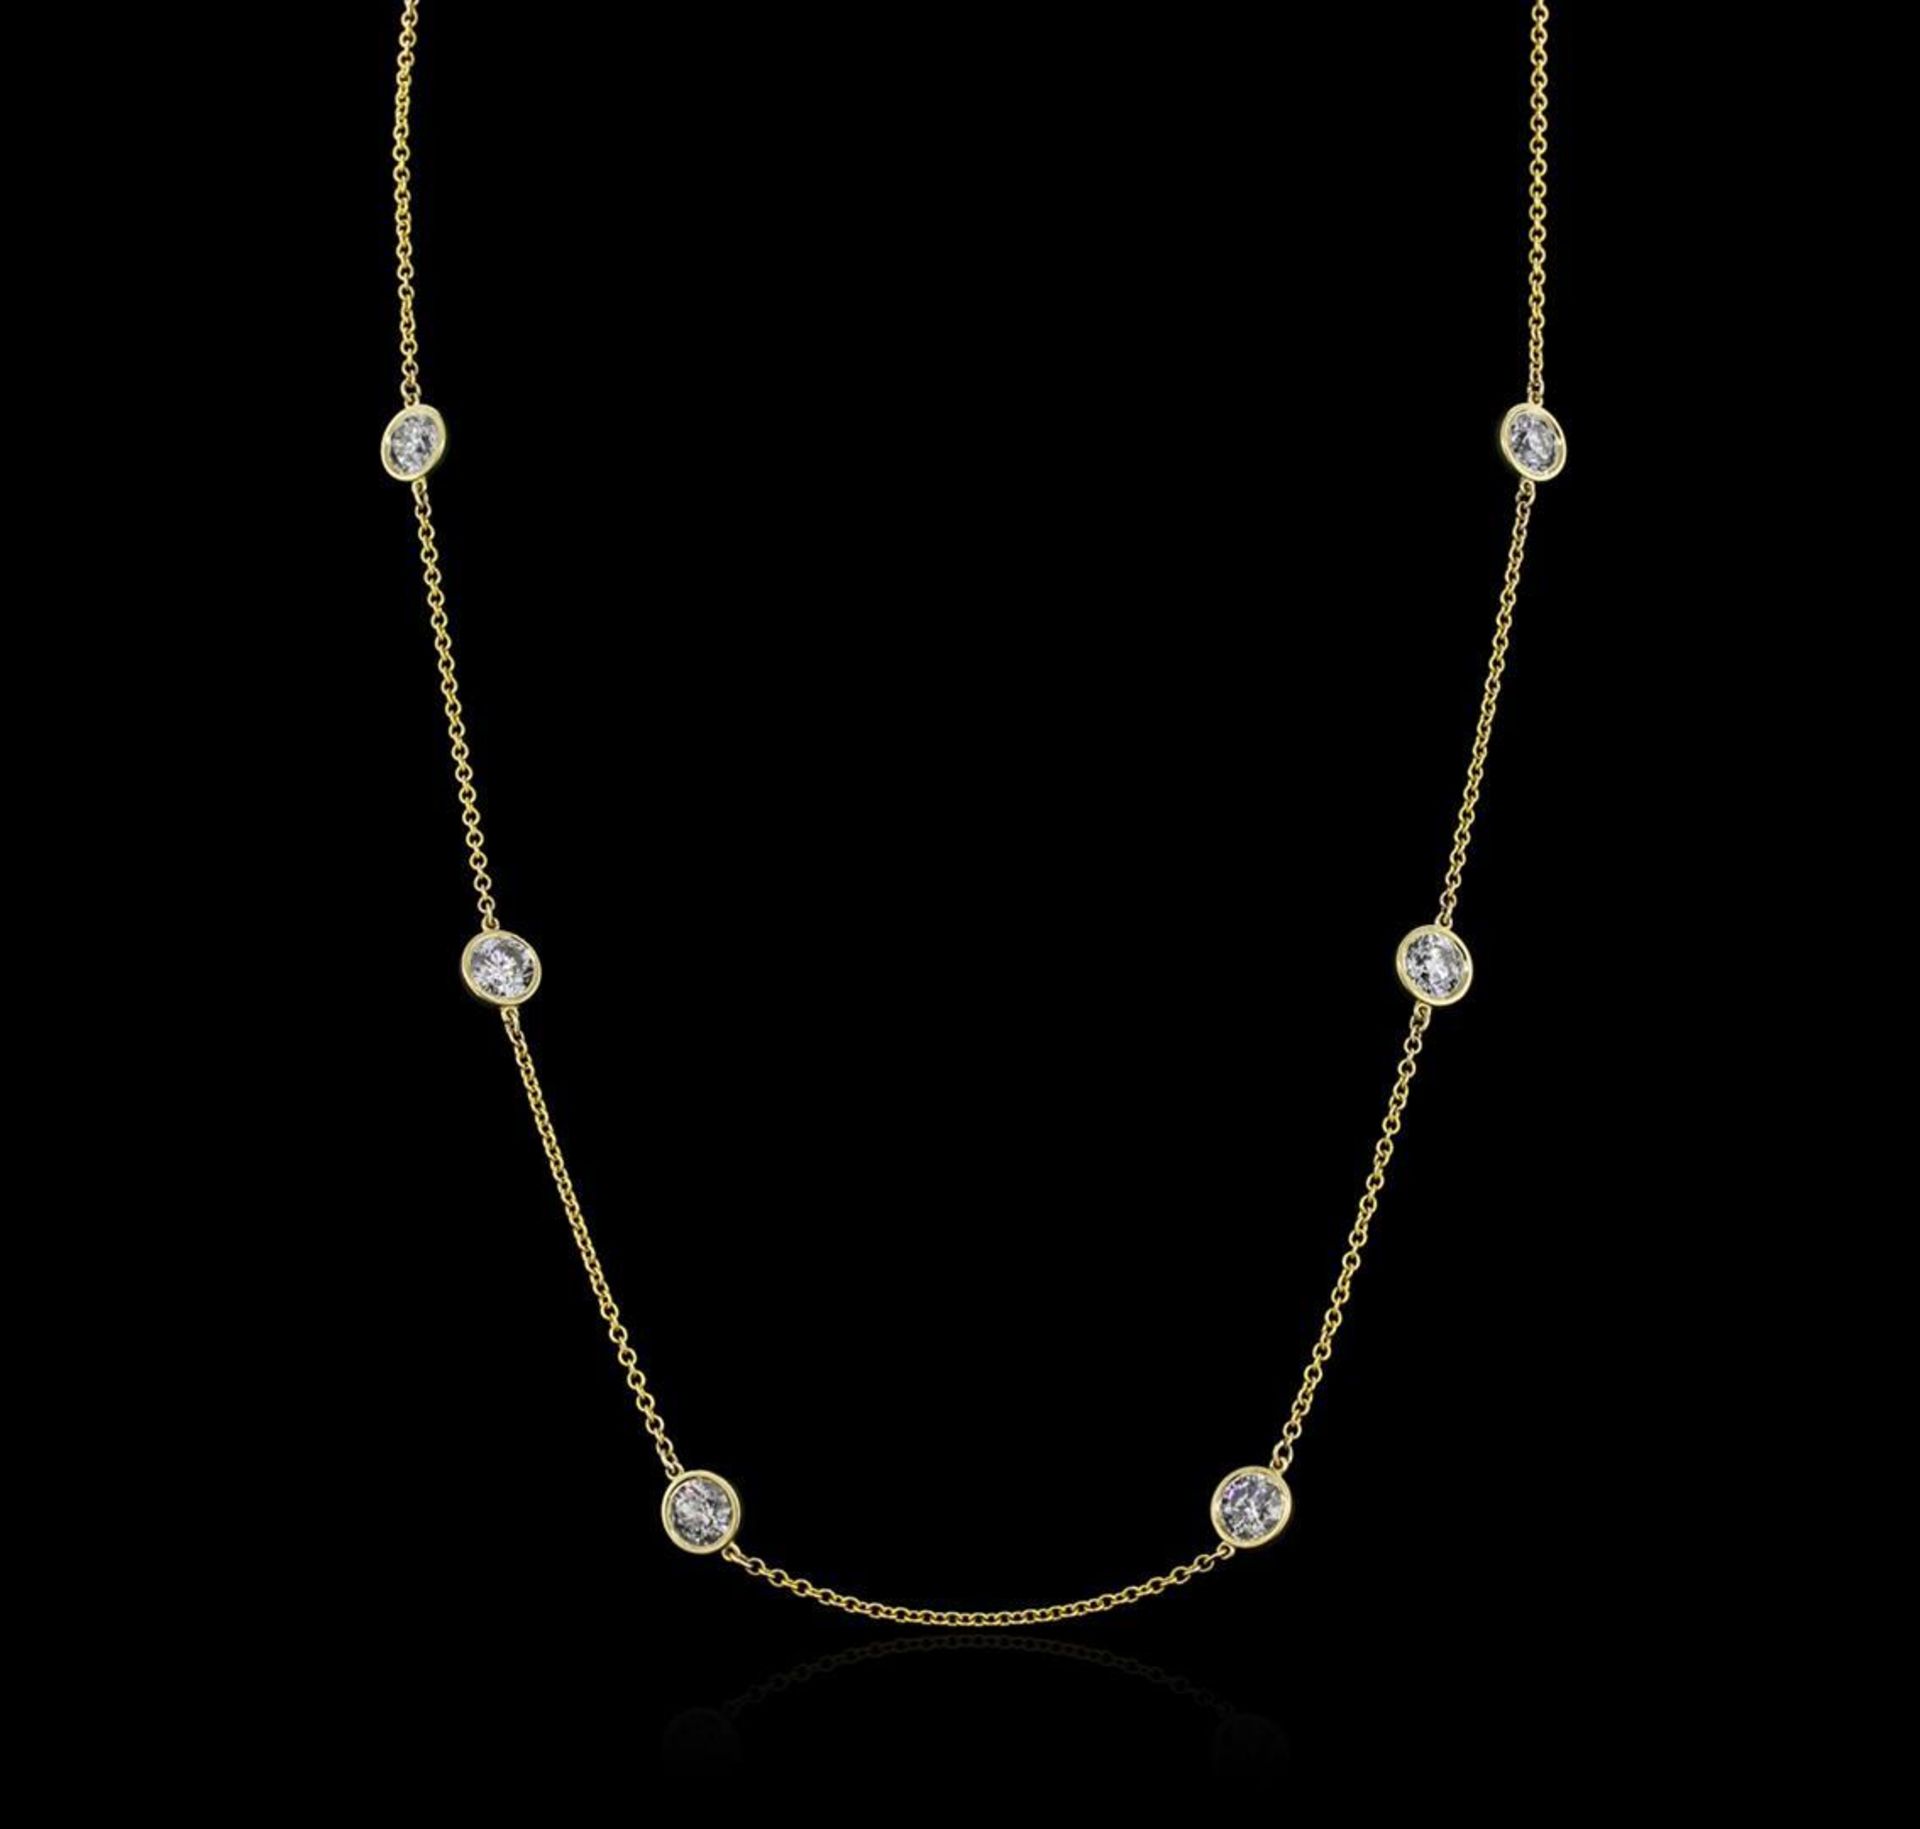 14KT Yellow Gold 4.87 ctw Diamond Necklace - Image 3 of 6